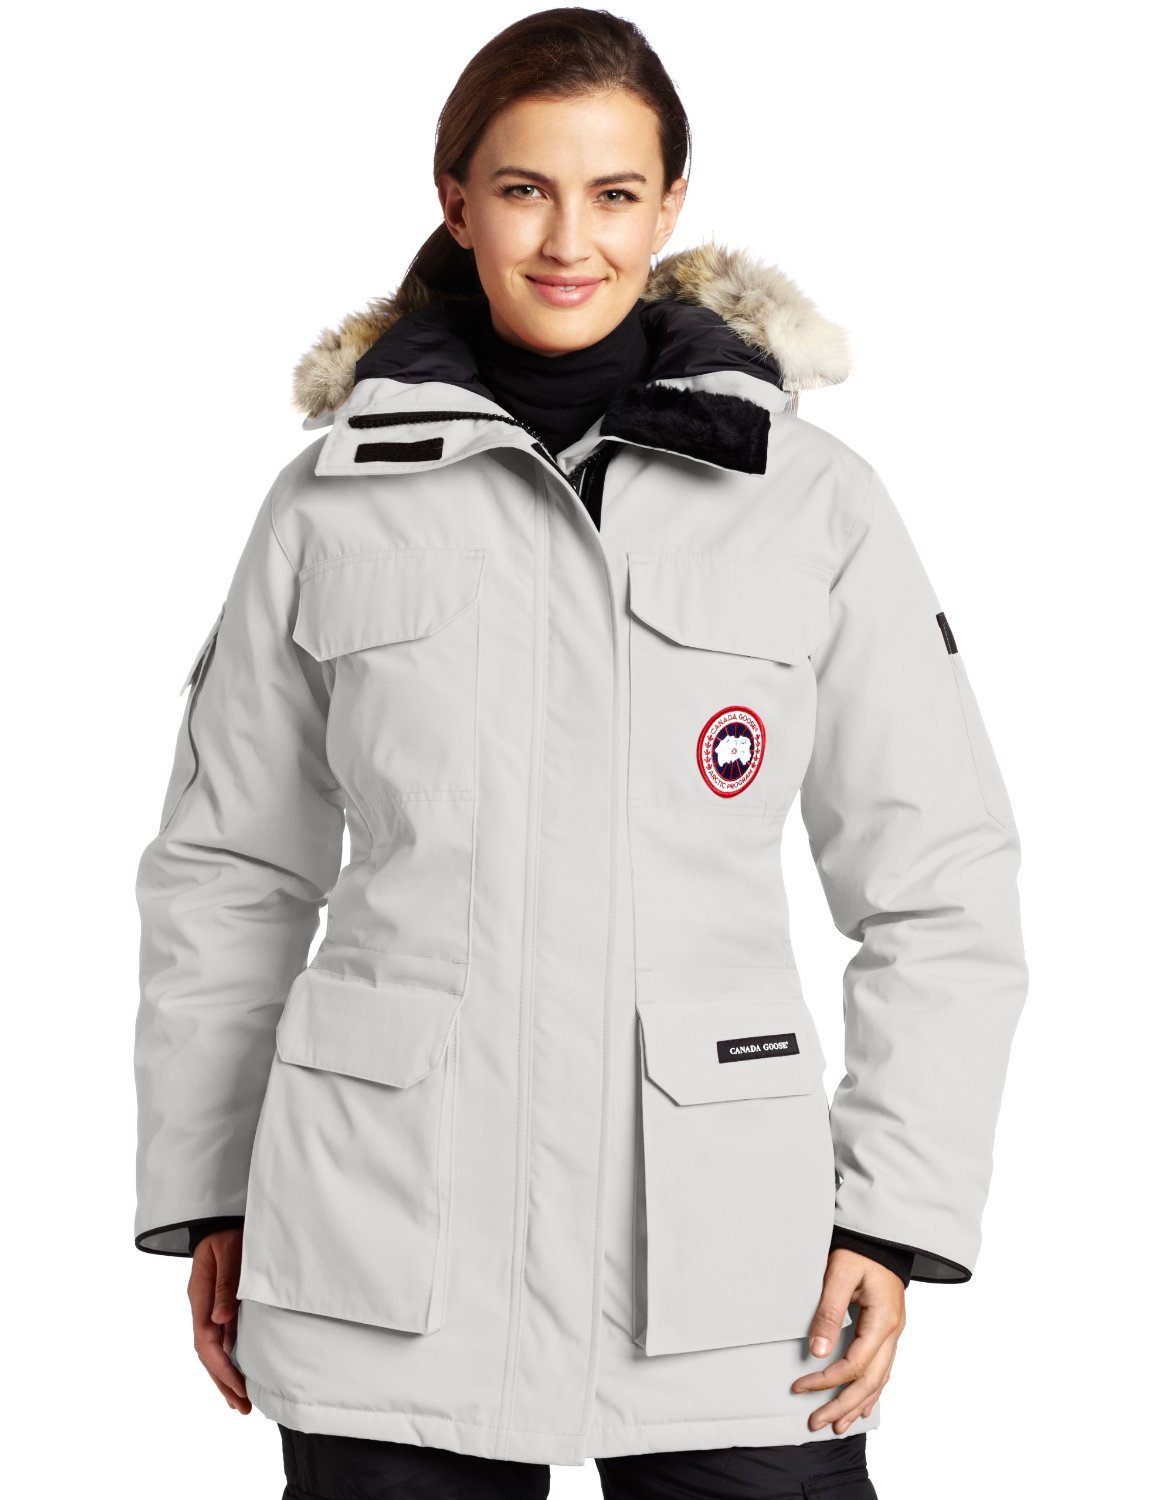 Canada Goose expedition parka online cheap - 70% OFF Canada Goose Jakke Tilbud - Canada Goose Jakke Dame ...